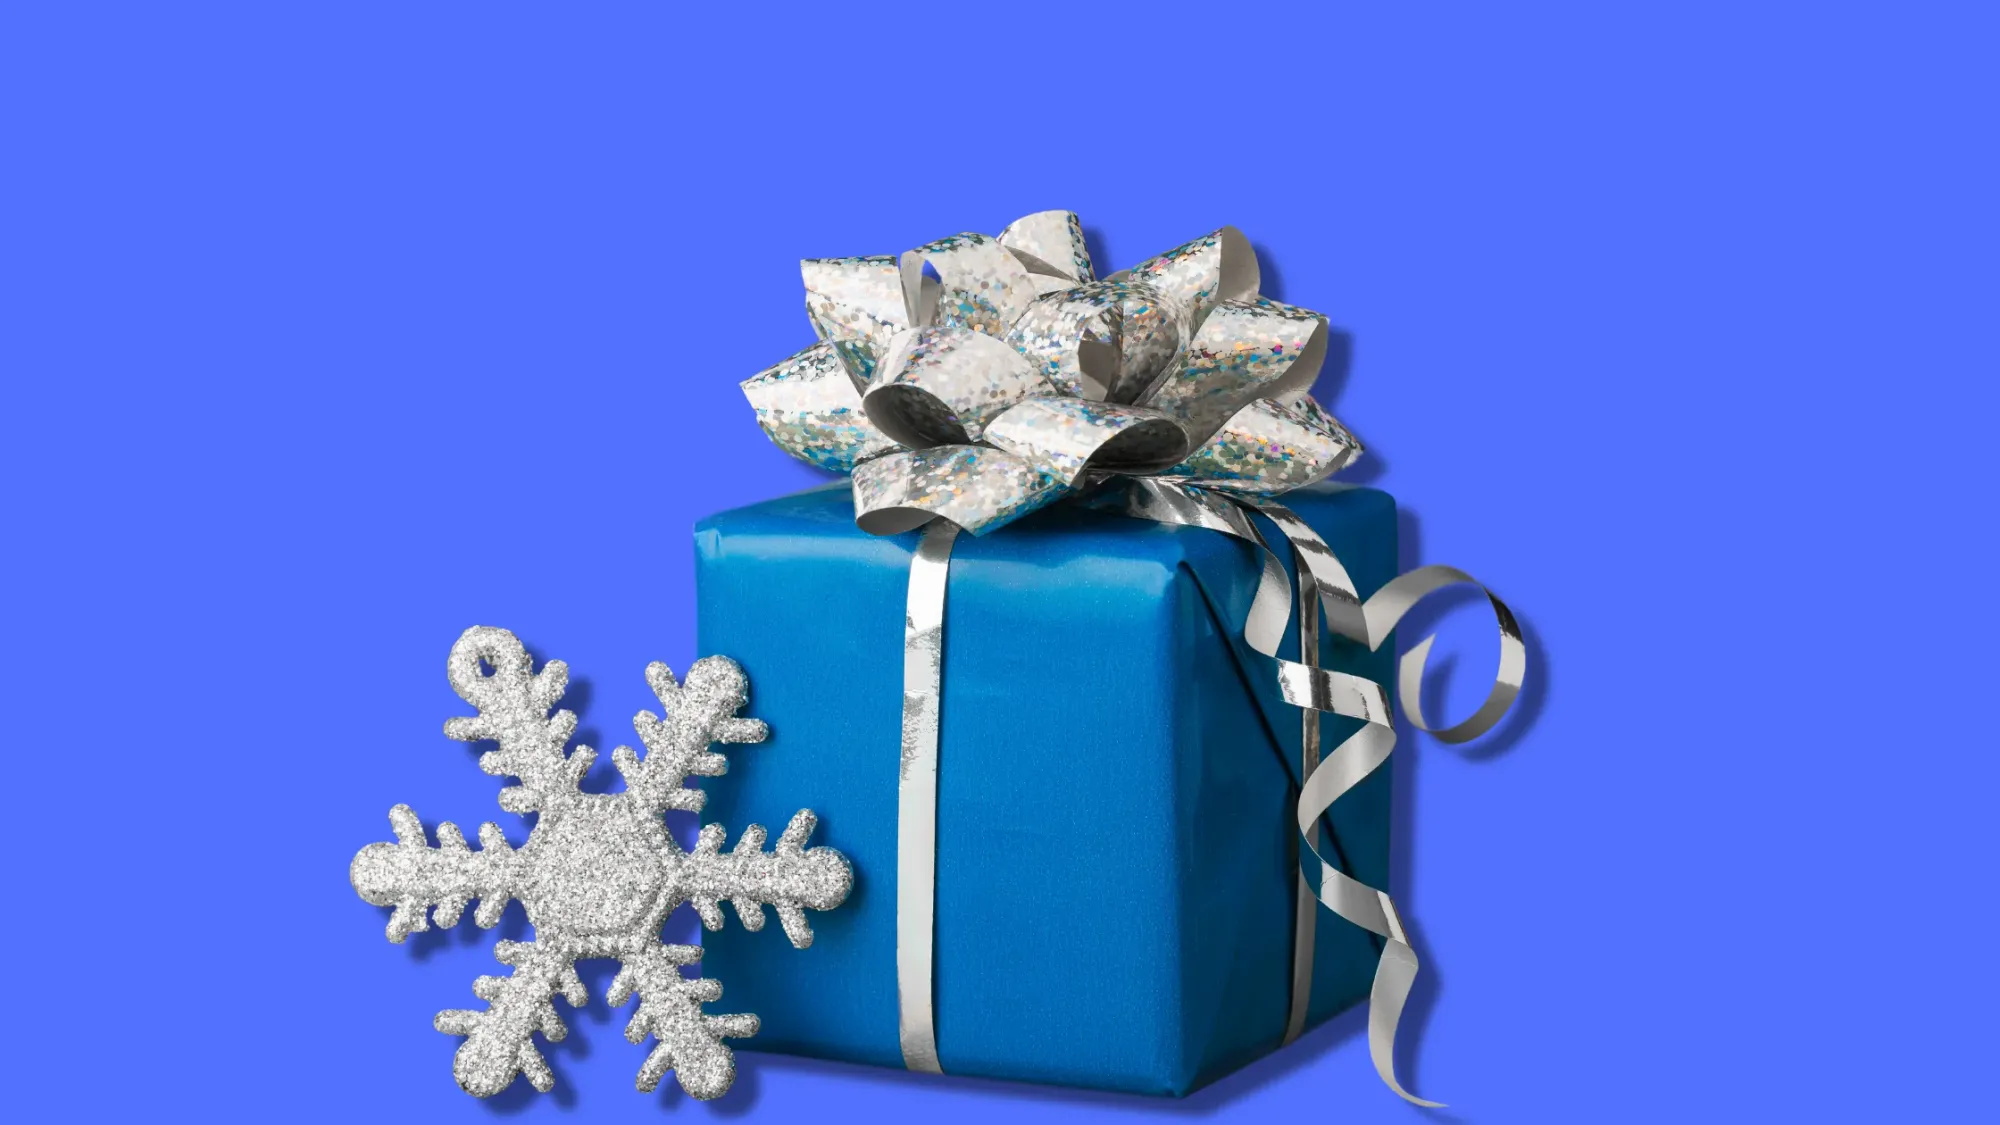 https://blog.empuls.io/de/content/images/2022/12/Christmas-Gifts-for-Bosses---Managers.webp